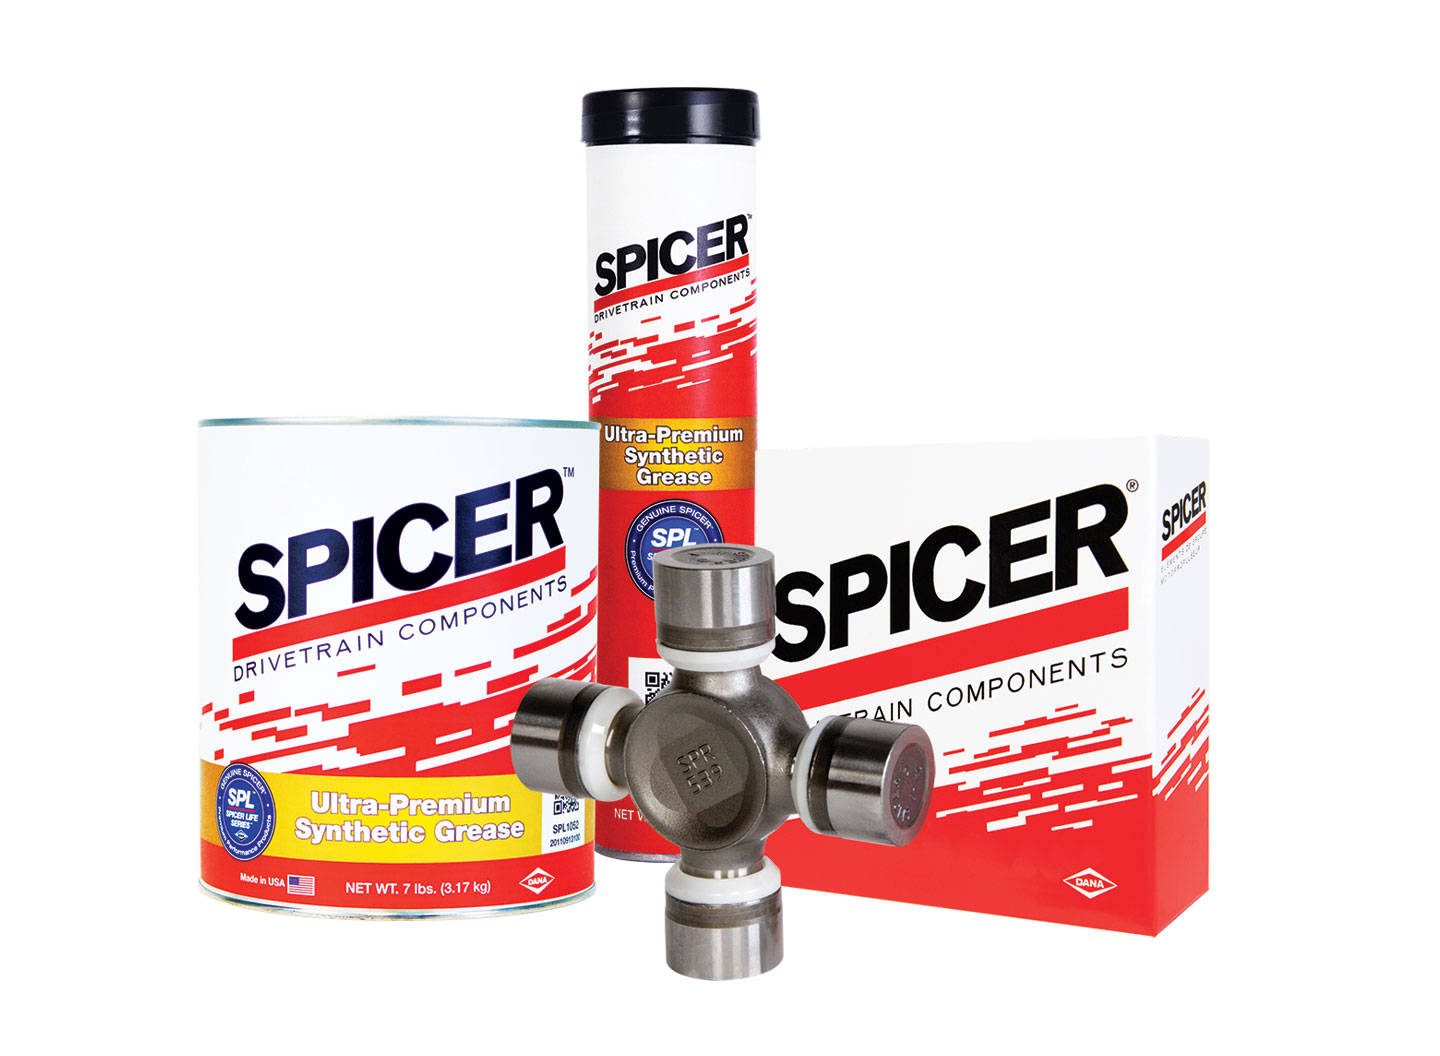 Spicer Lube Package Group